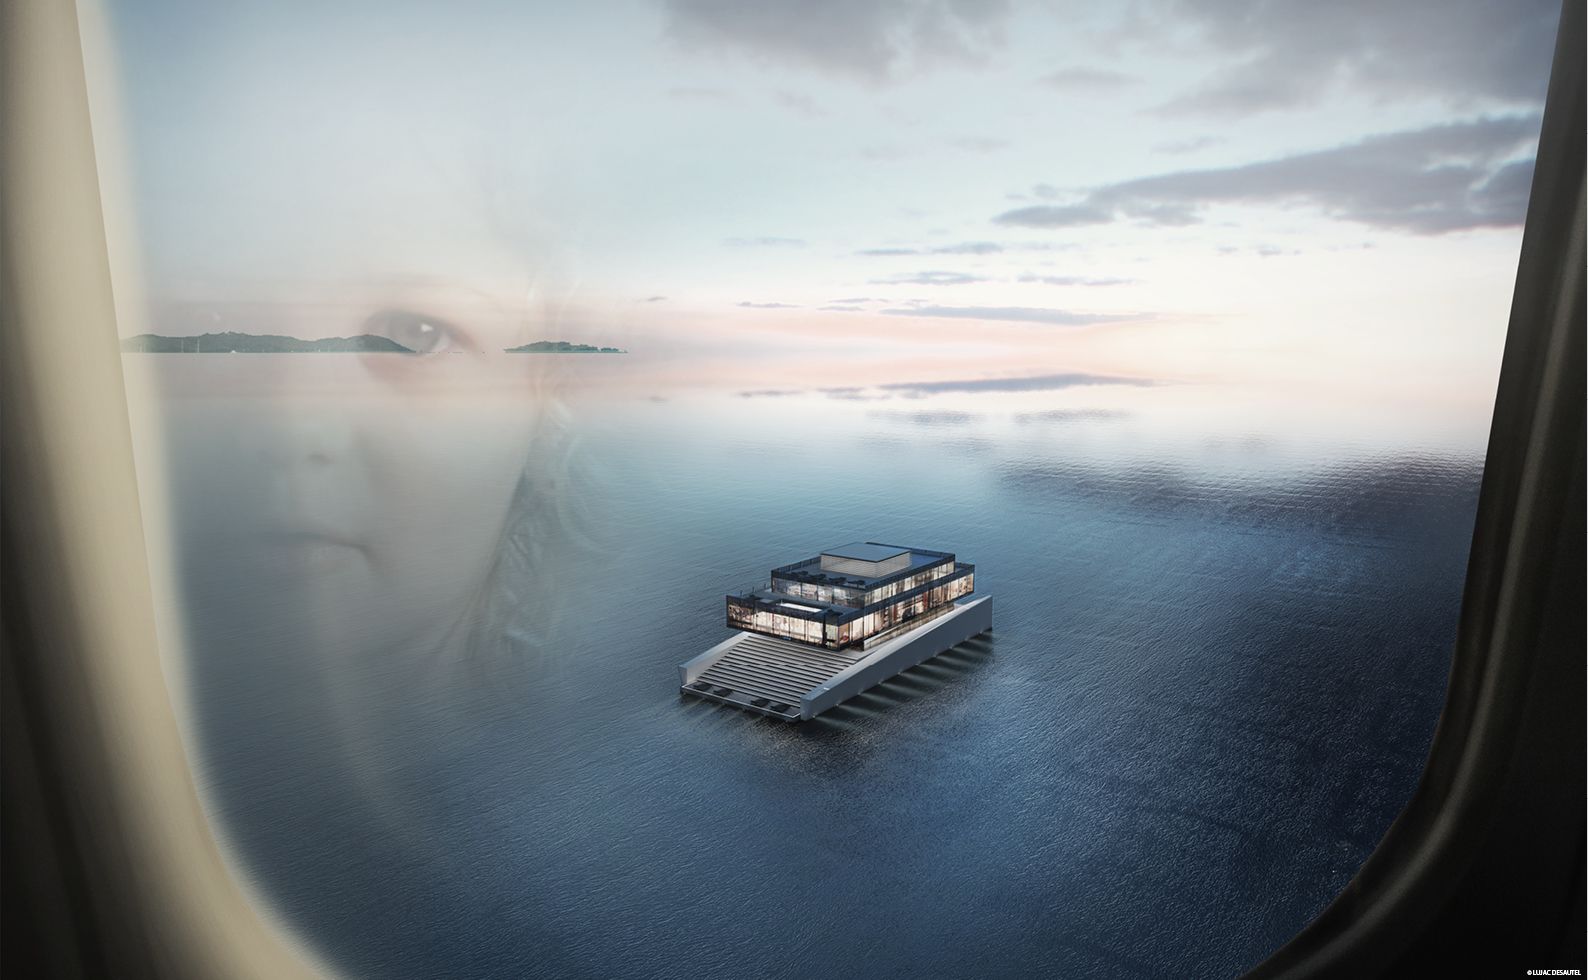 Fantastical superyachts of the future: In your dreams?